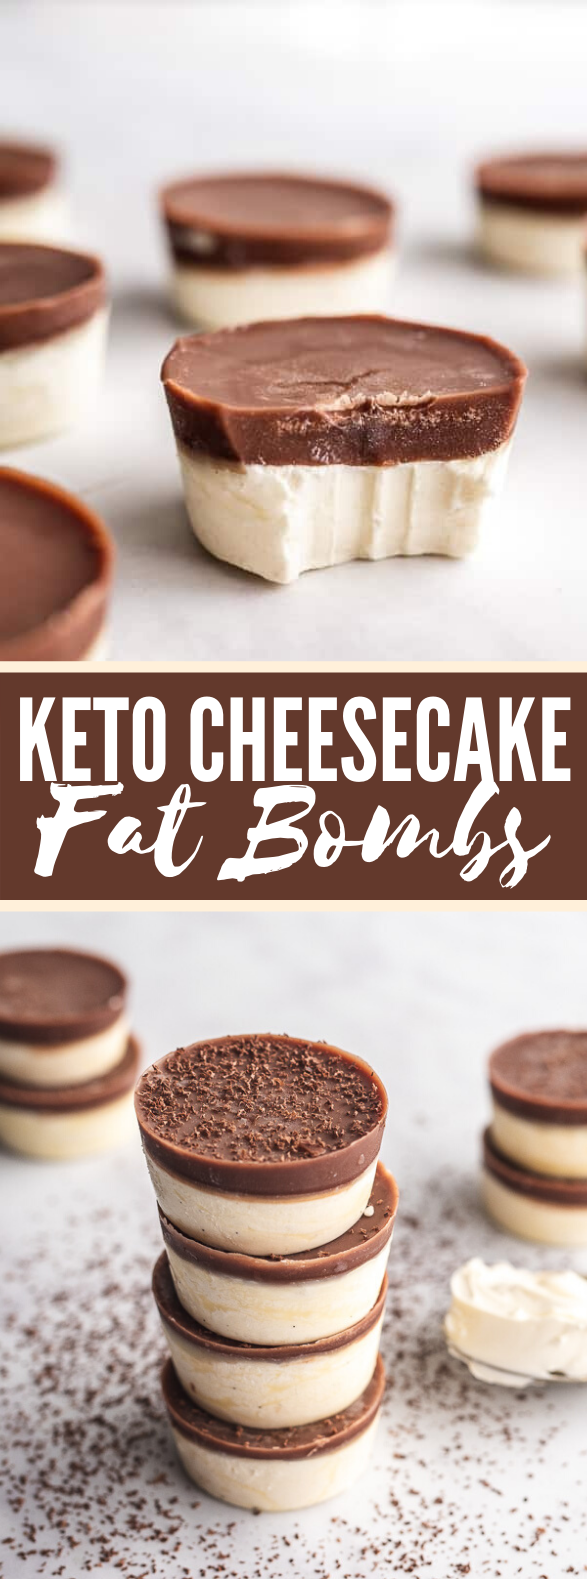 KETO CHEESECAKE FAT BOMBS #healthy #lowcarb